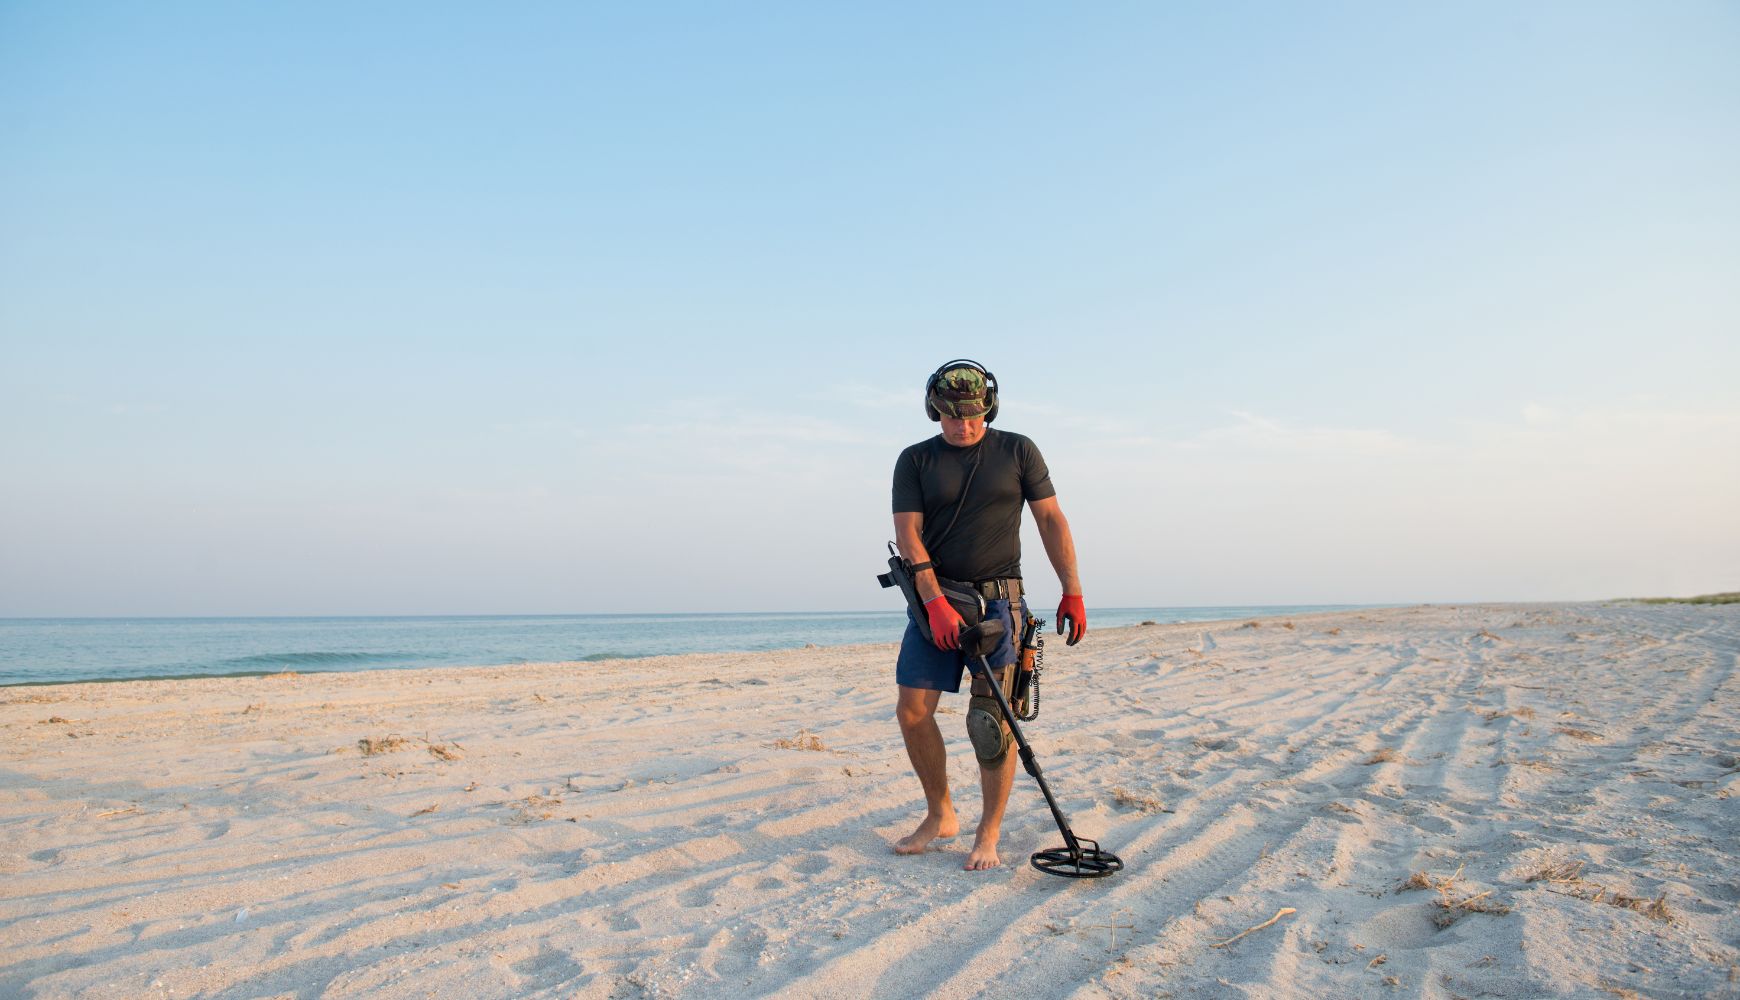 A Brief Guide to Metal Detecting on the Beach